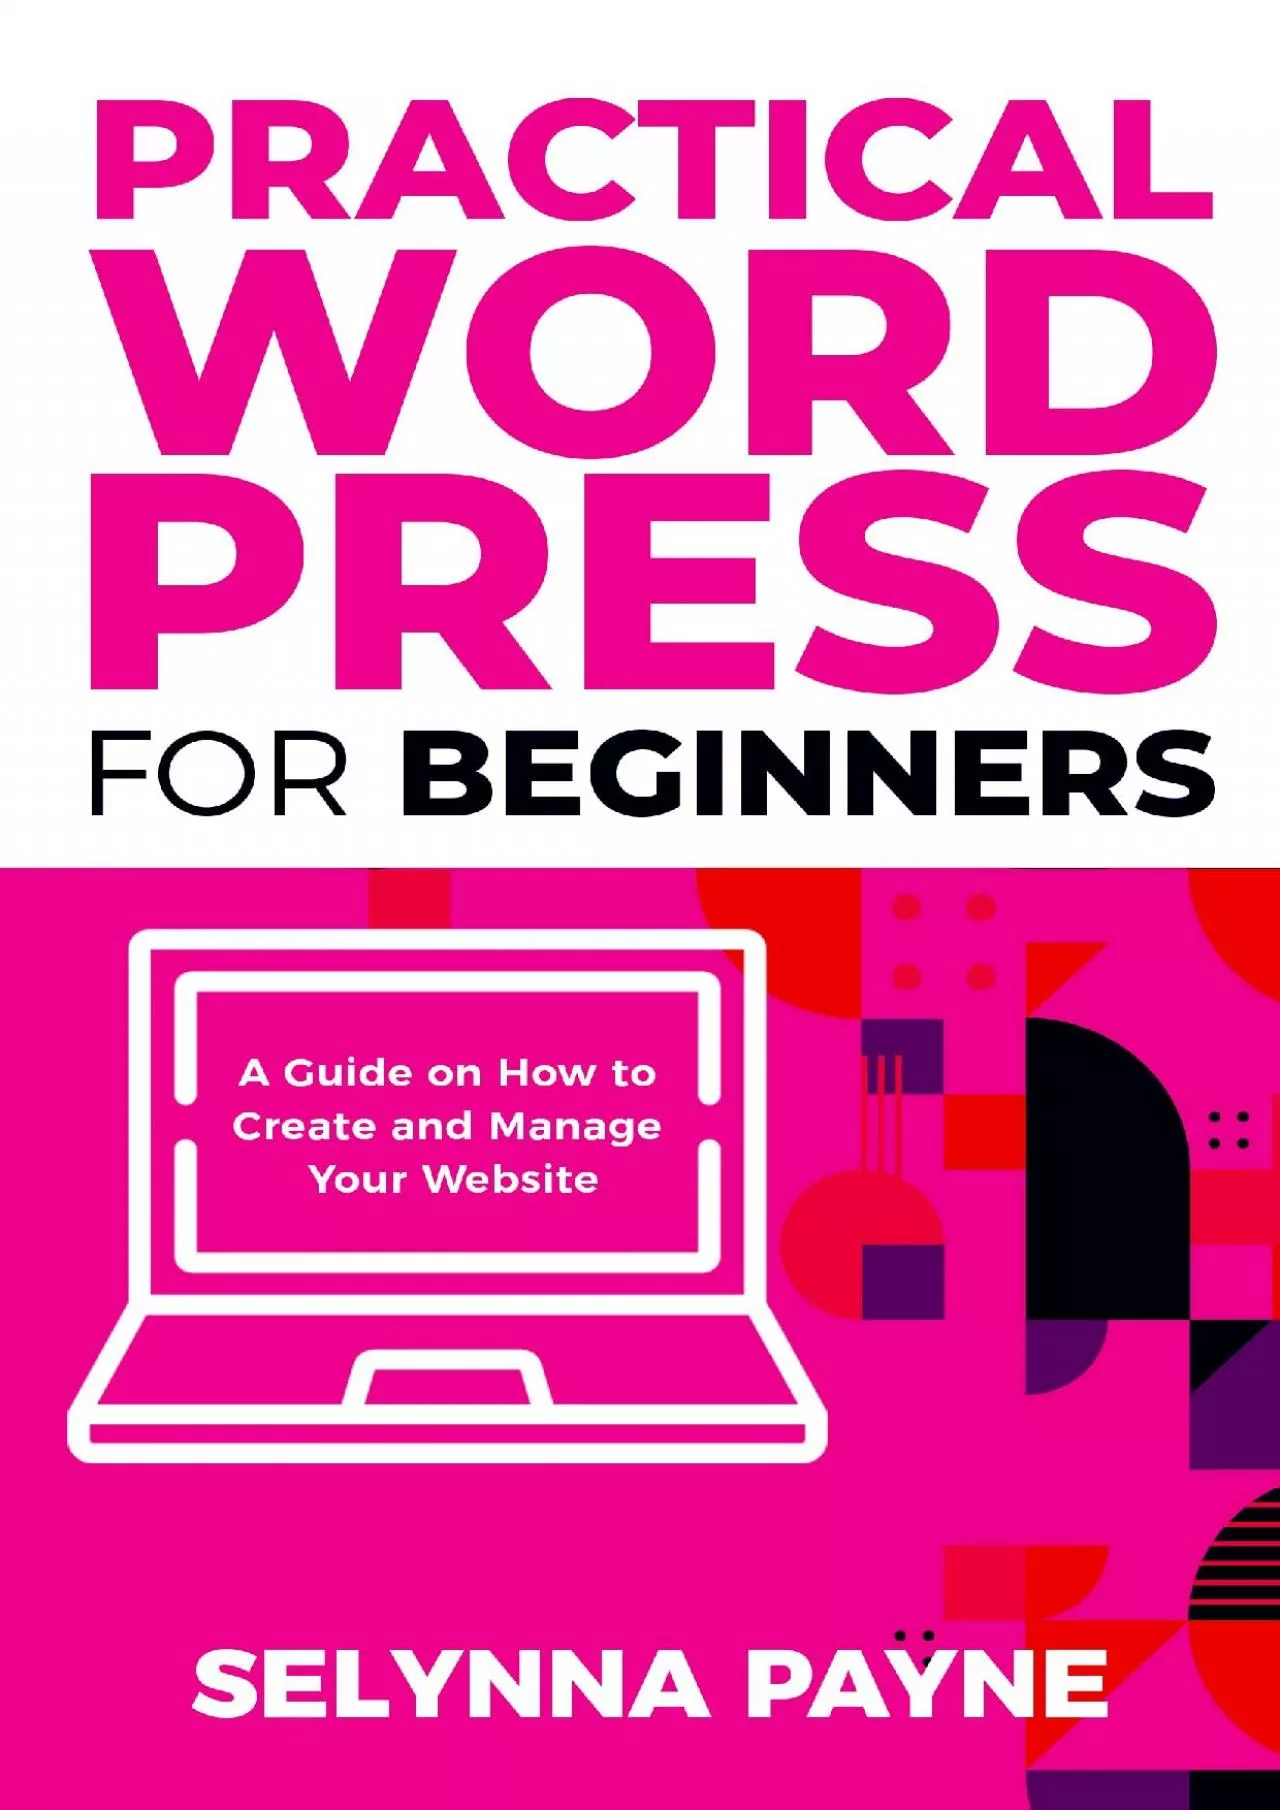 (EBOOK)-Practical WordPress for Beginners: A Guide on How to Create and Manage Your Website